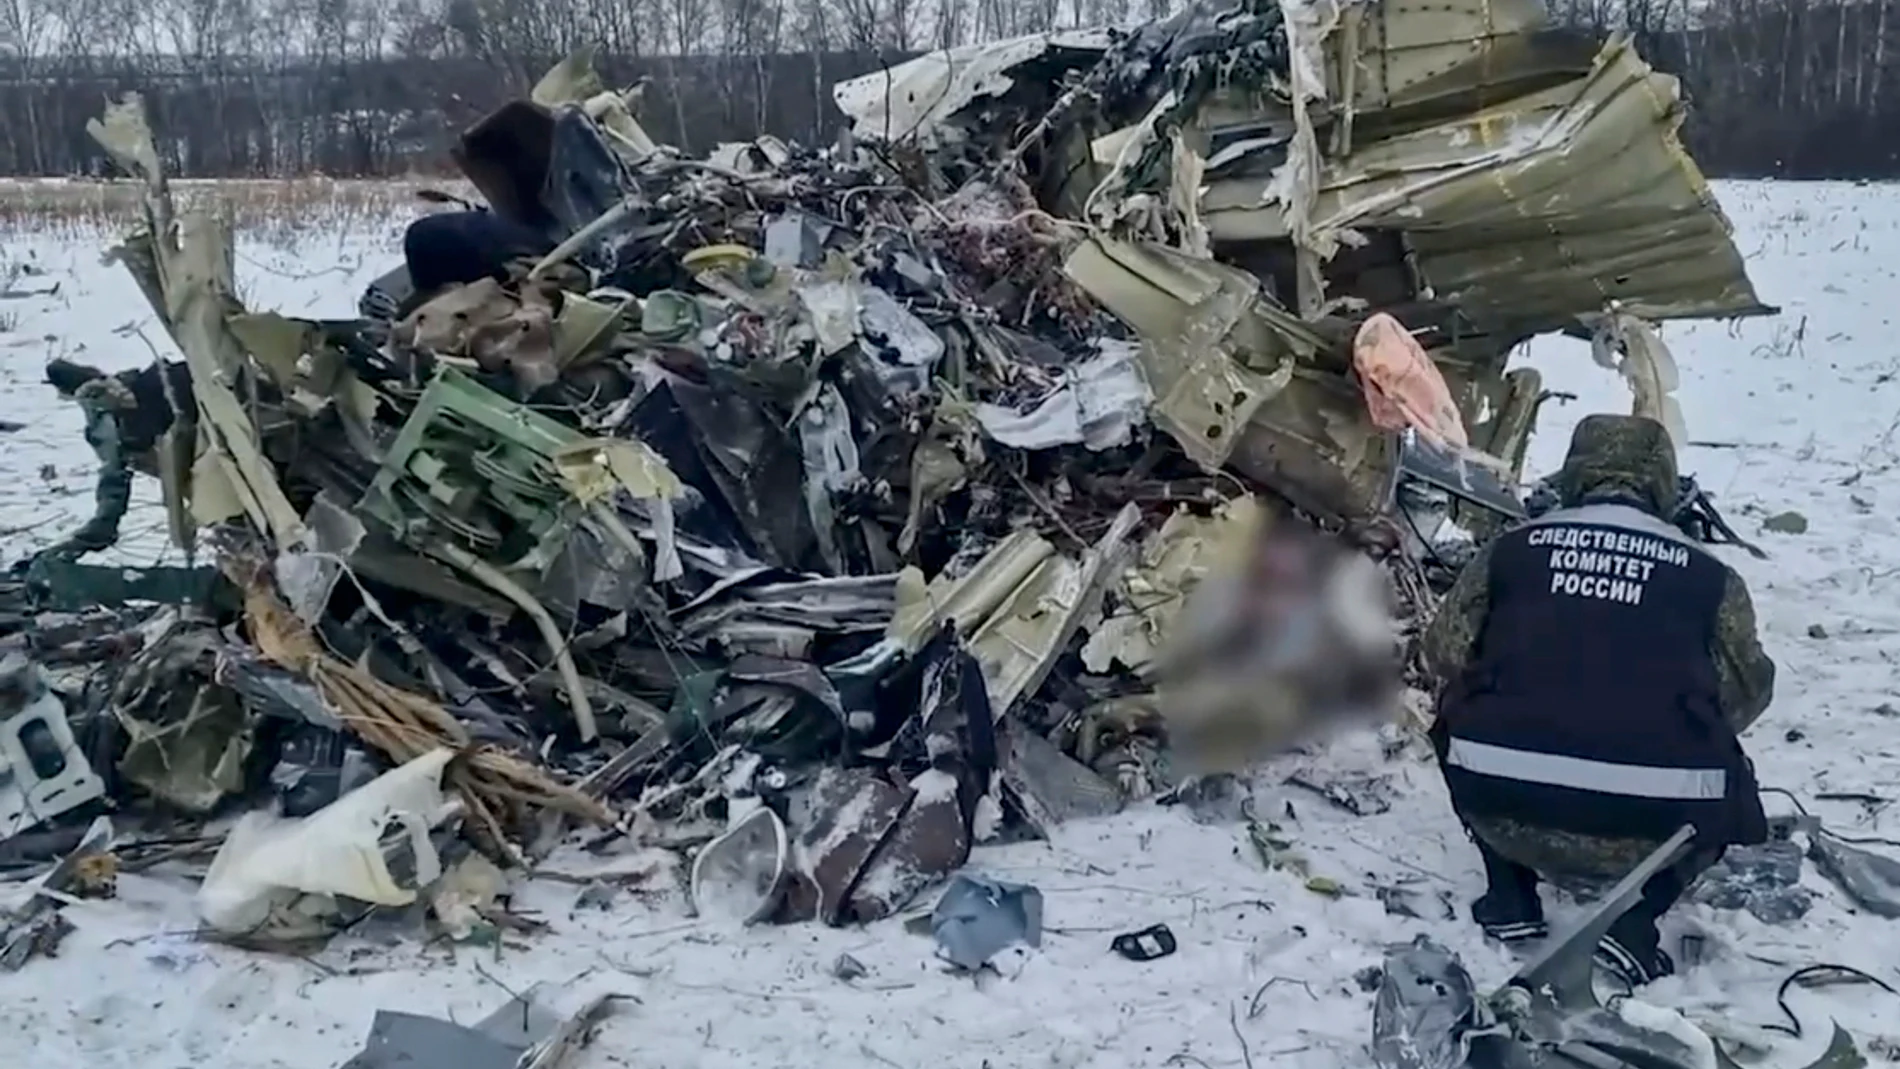 Yablonovo (Russian Federation), 25/01/2024.- A still image taken from handout video provided by the Russian Investigative Committee shows a Russian investigator examining debris at the crash site of an Ilyushin Il-76 airlifter near the village of Yablonovo, Belgorod region, Russia, 25 January 2024. A flight parameters recording device and a voice recorder were found at the site, the Committee confirmed. The Il-76 plane crashed on 24 January while transporting Ukrainian prisoners of war who we...